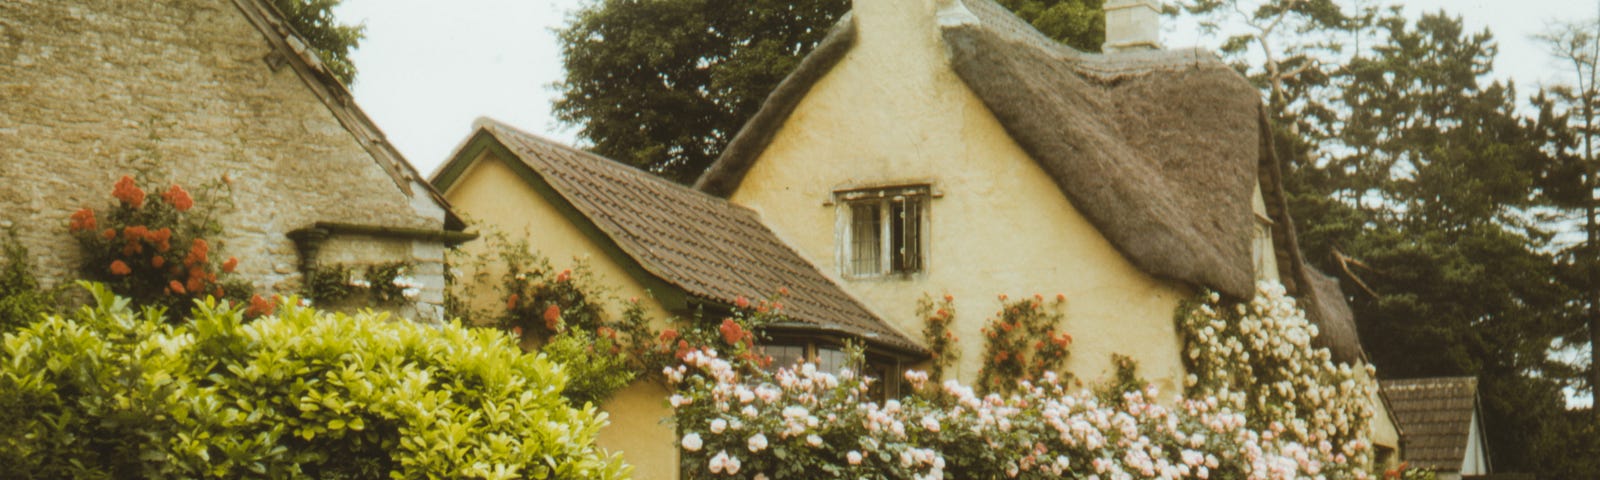 Picturesque English country cottage with thatched roof.